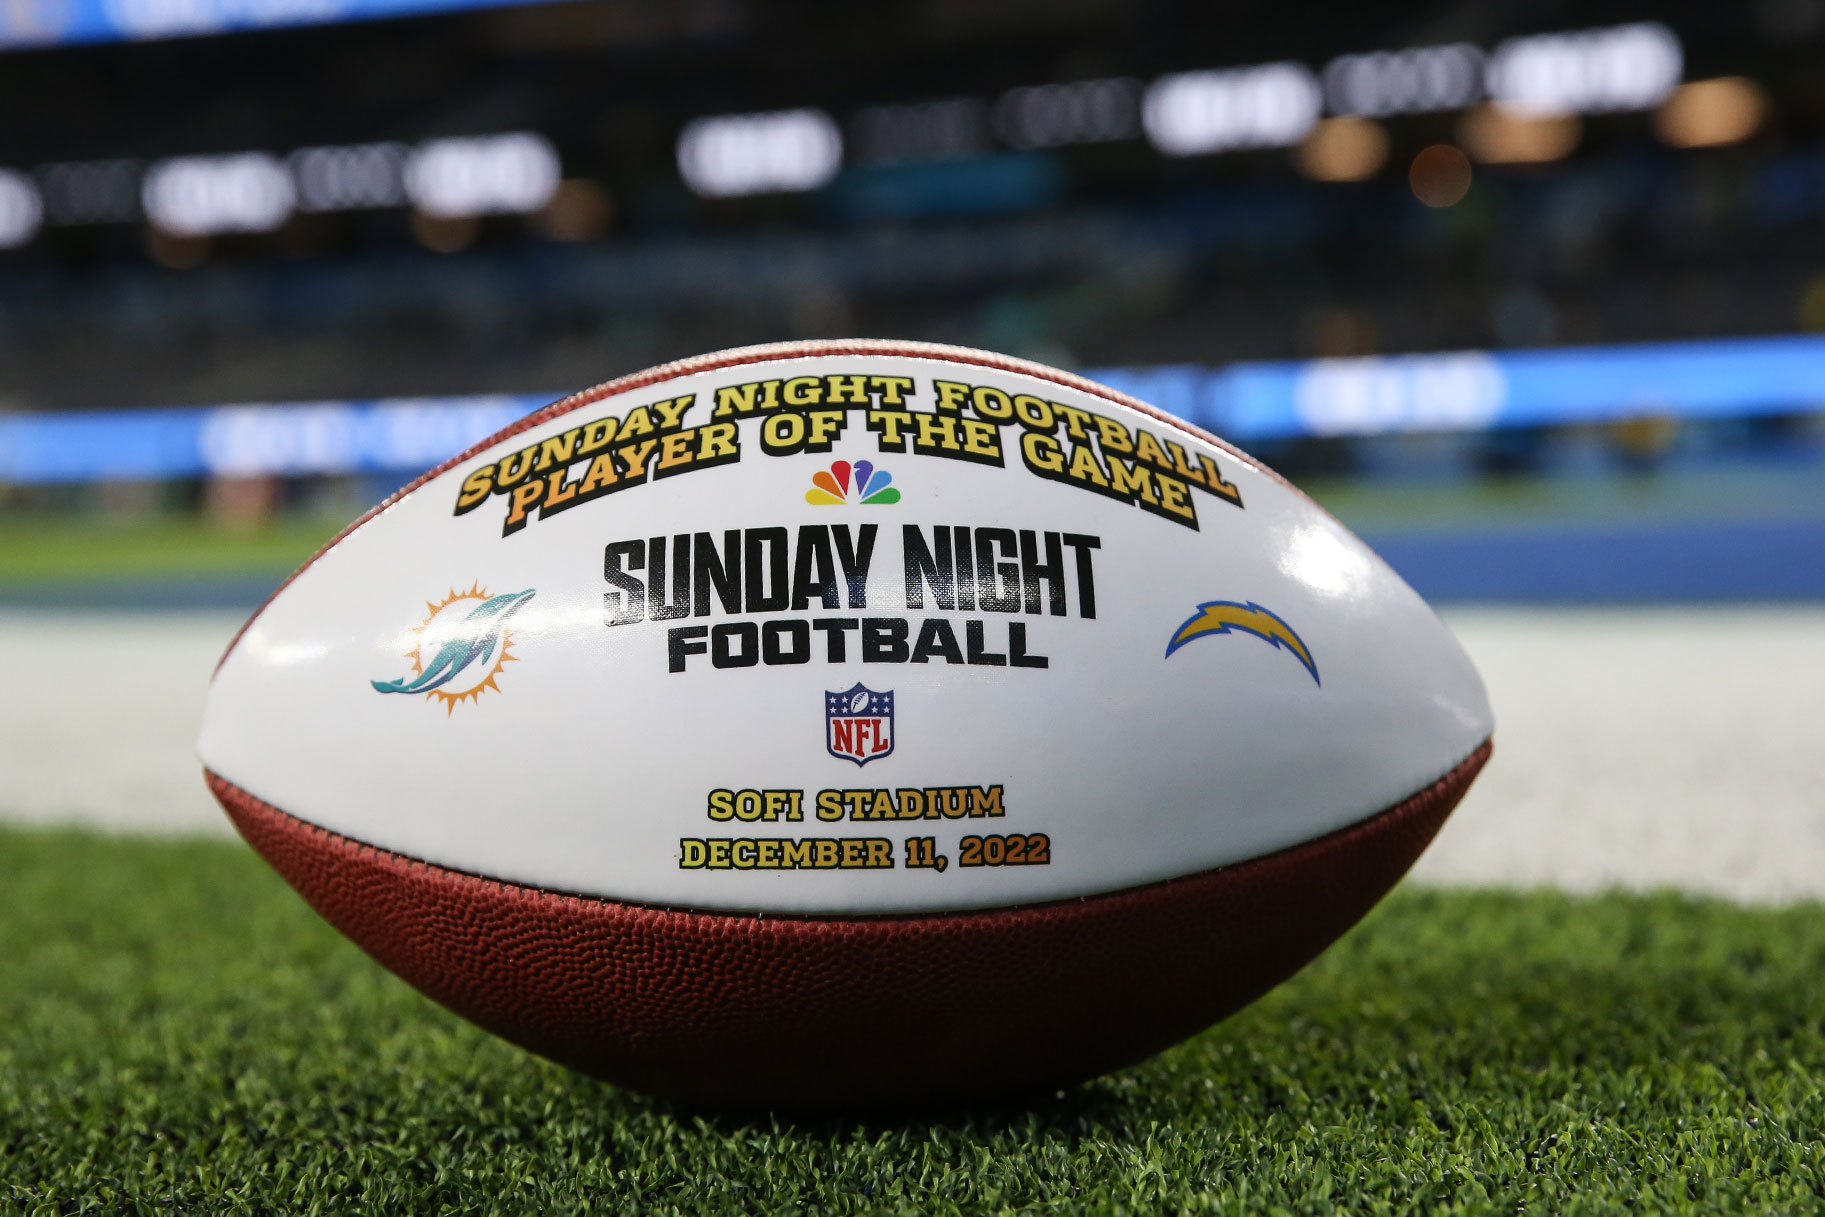 Monday Night Football: How to Watch & Stream Online Without Cable